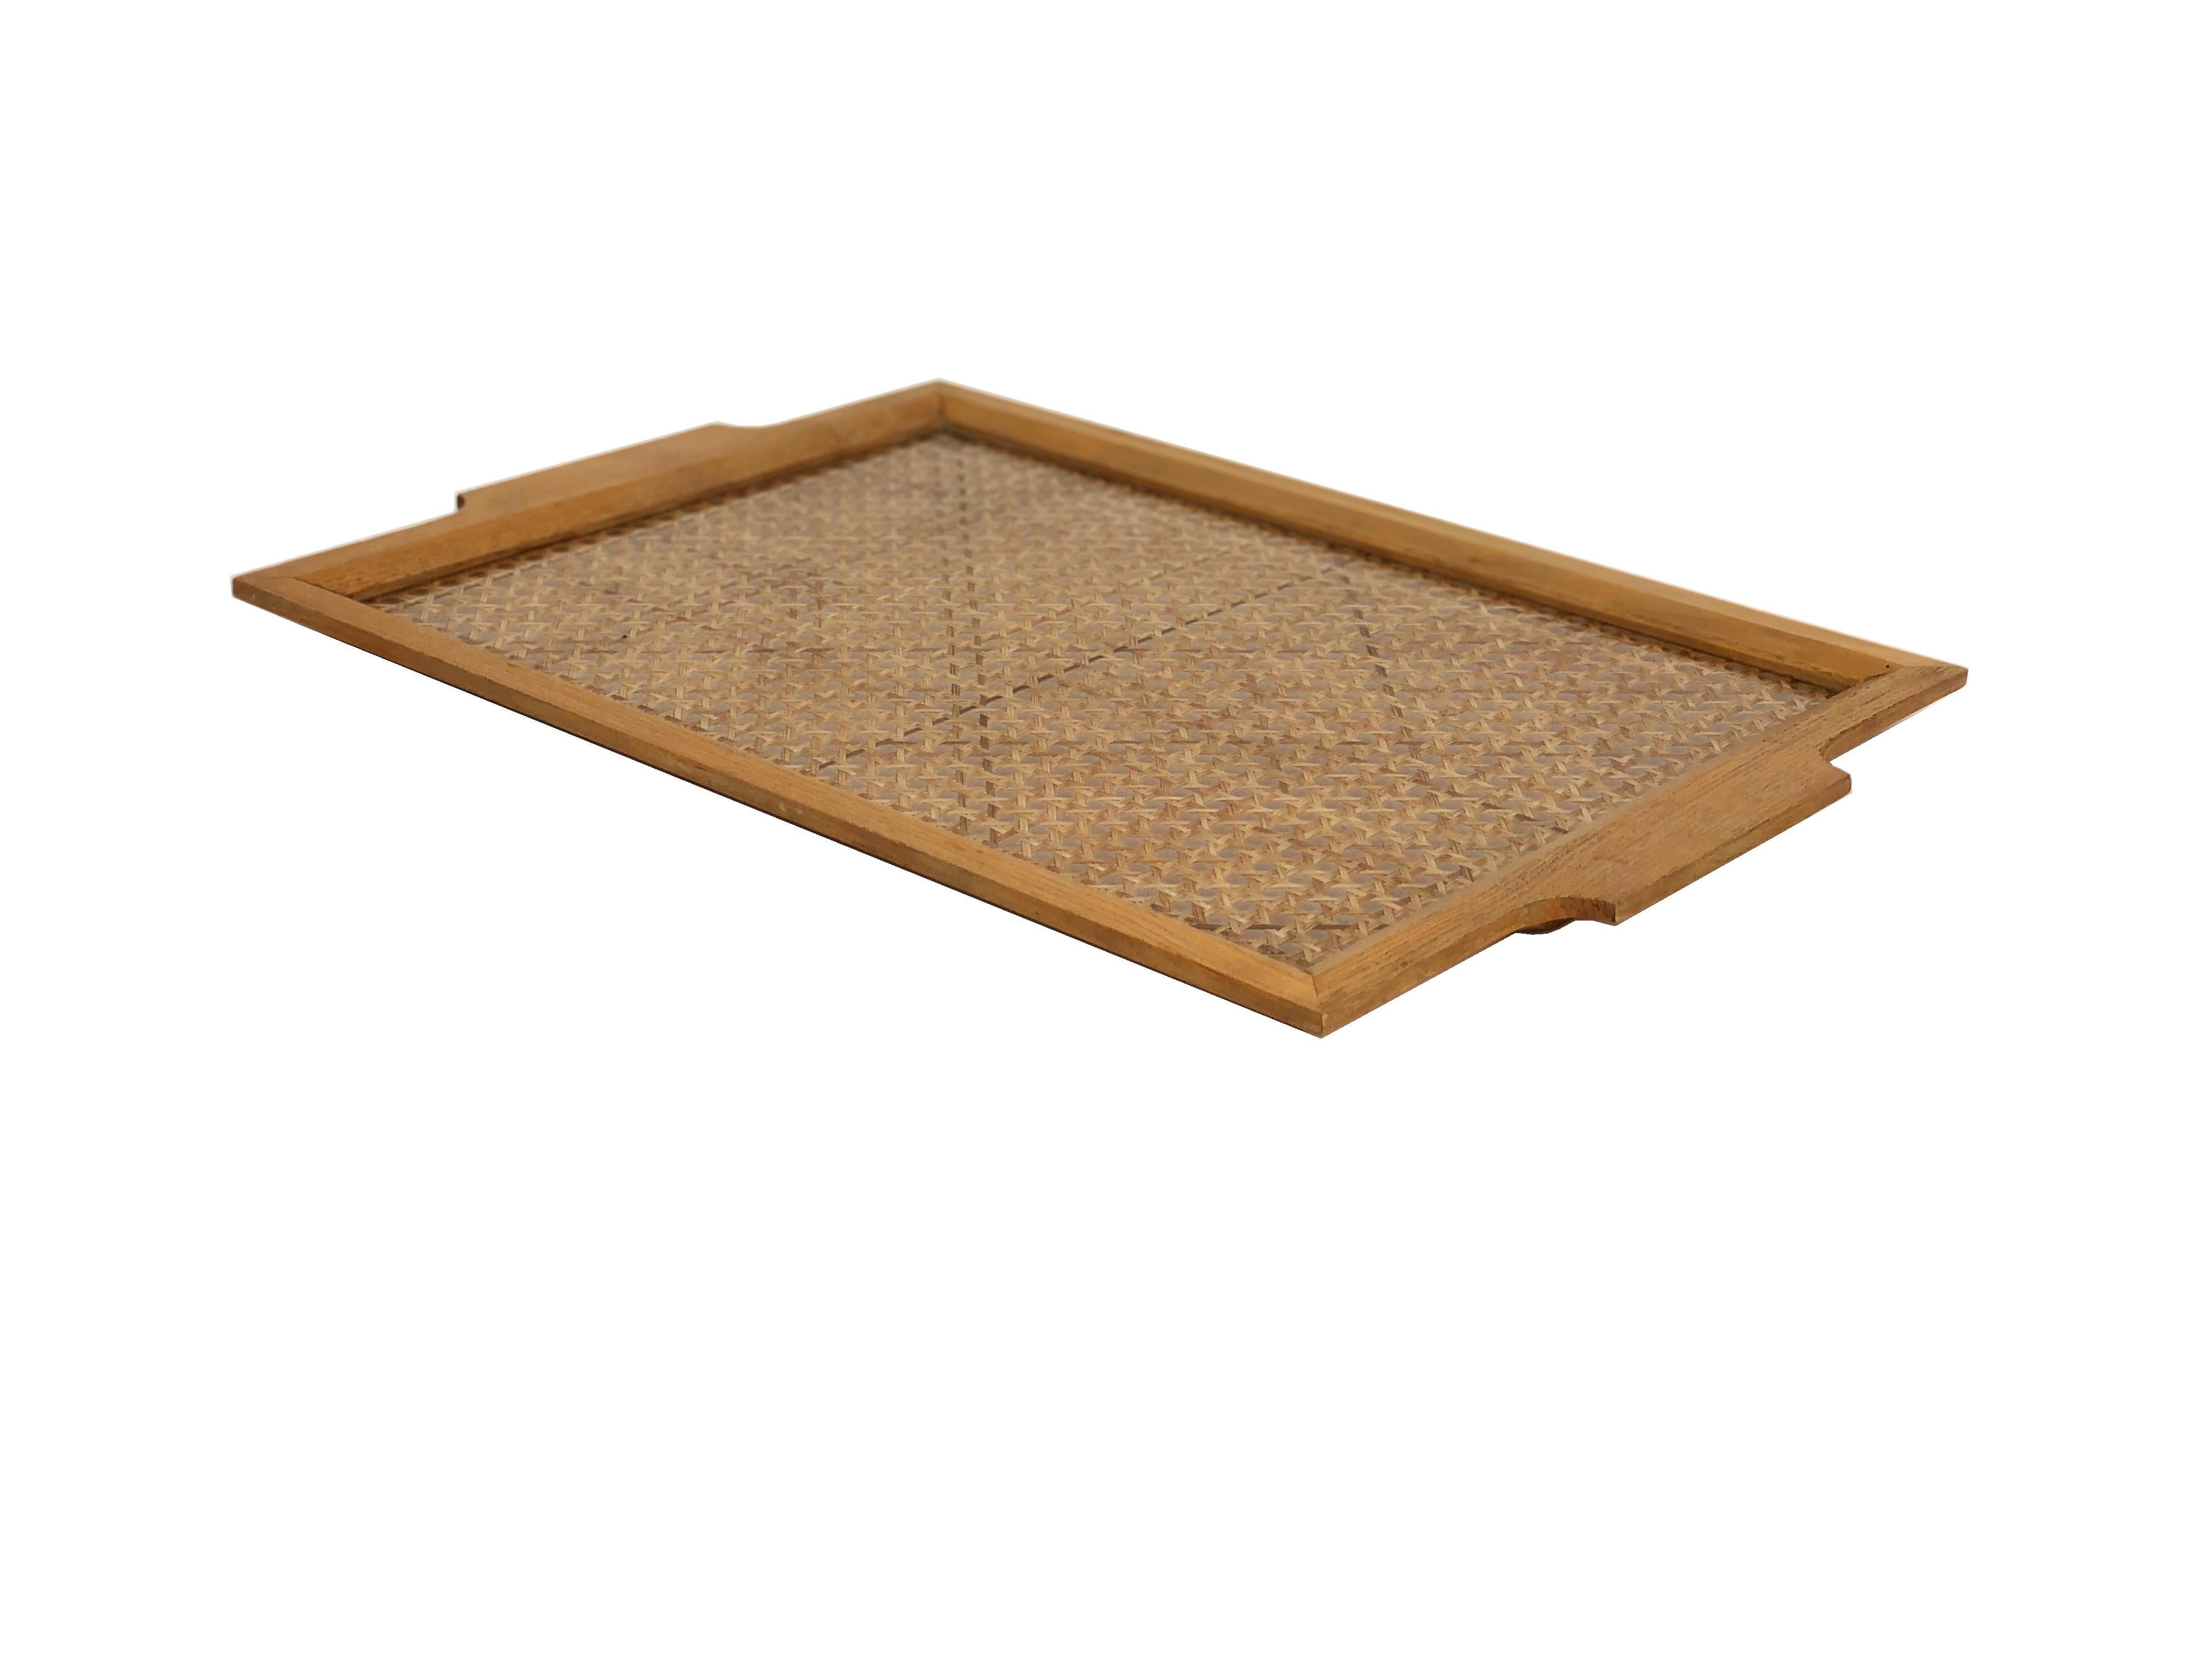 Late 20th Century Lucite, Wicker and Wood Serving Tray, Italy Mid-Century Modern Style